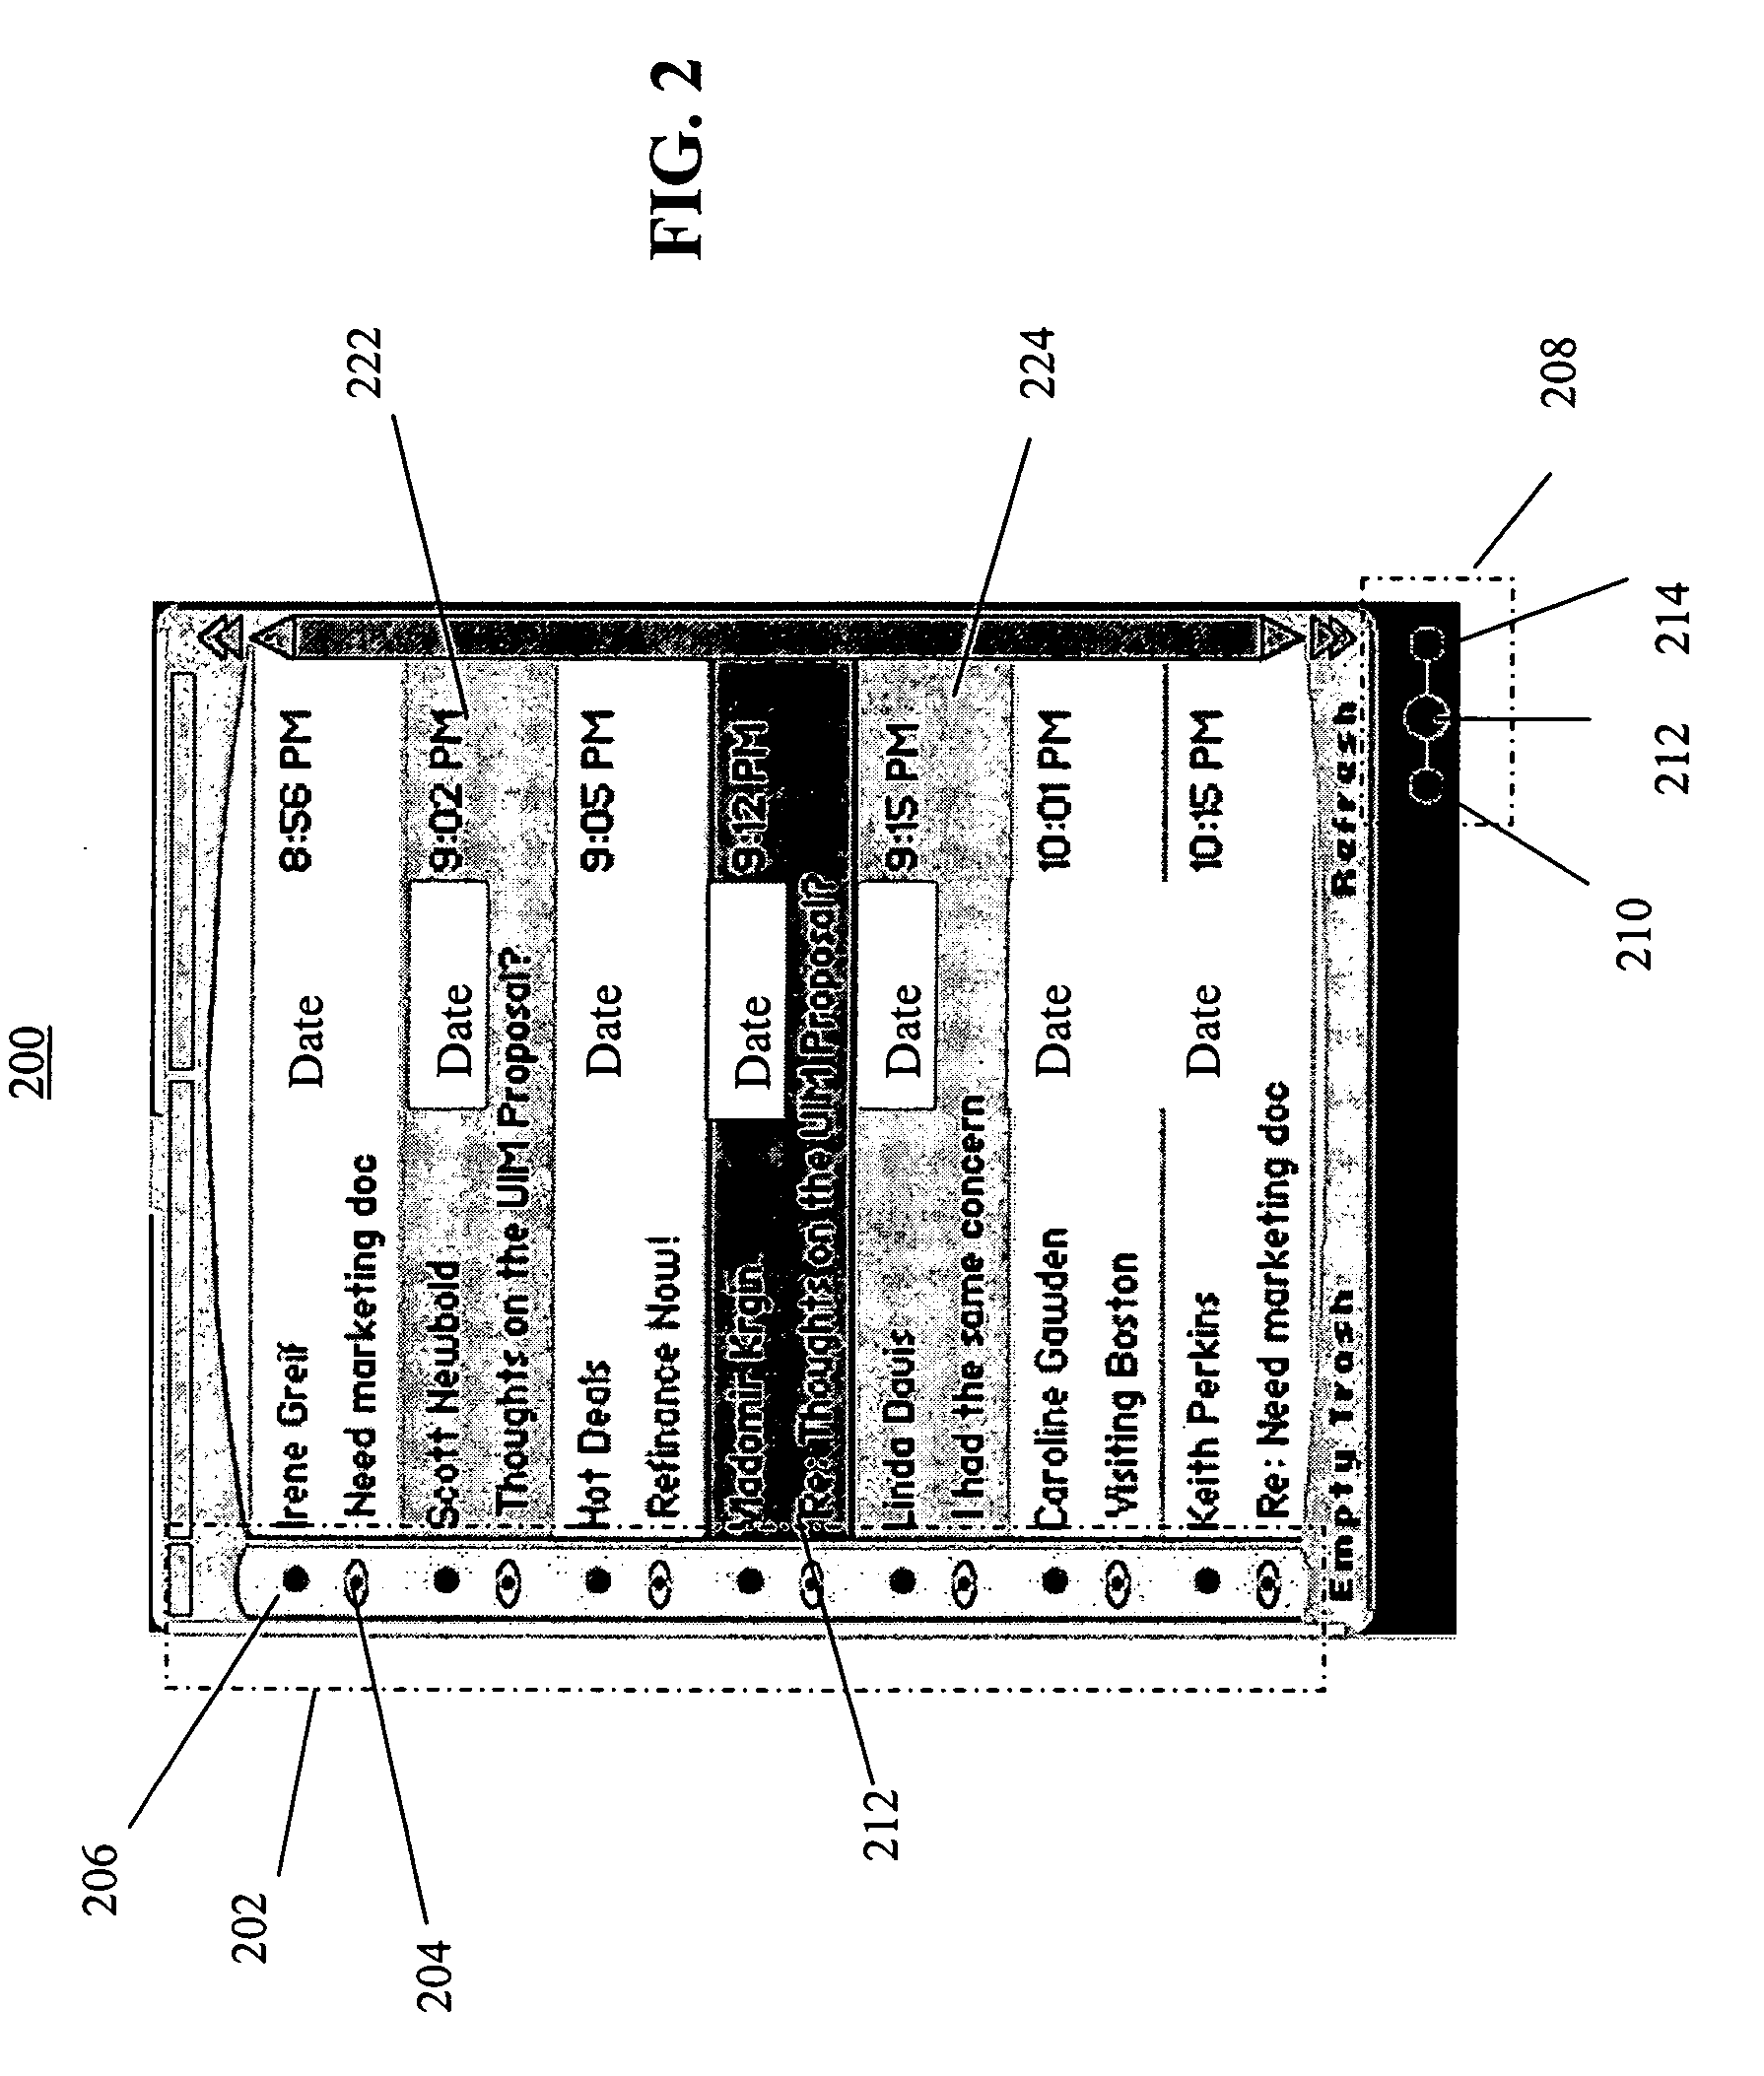 Method and apparatus for setting attributes and initiating actions through gestures